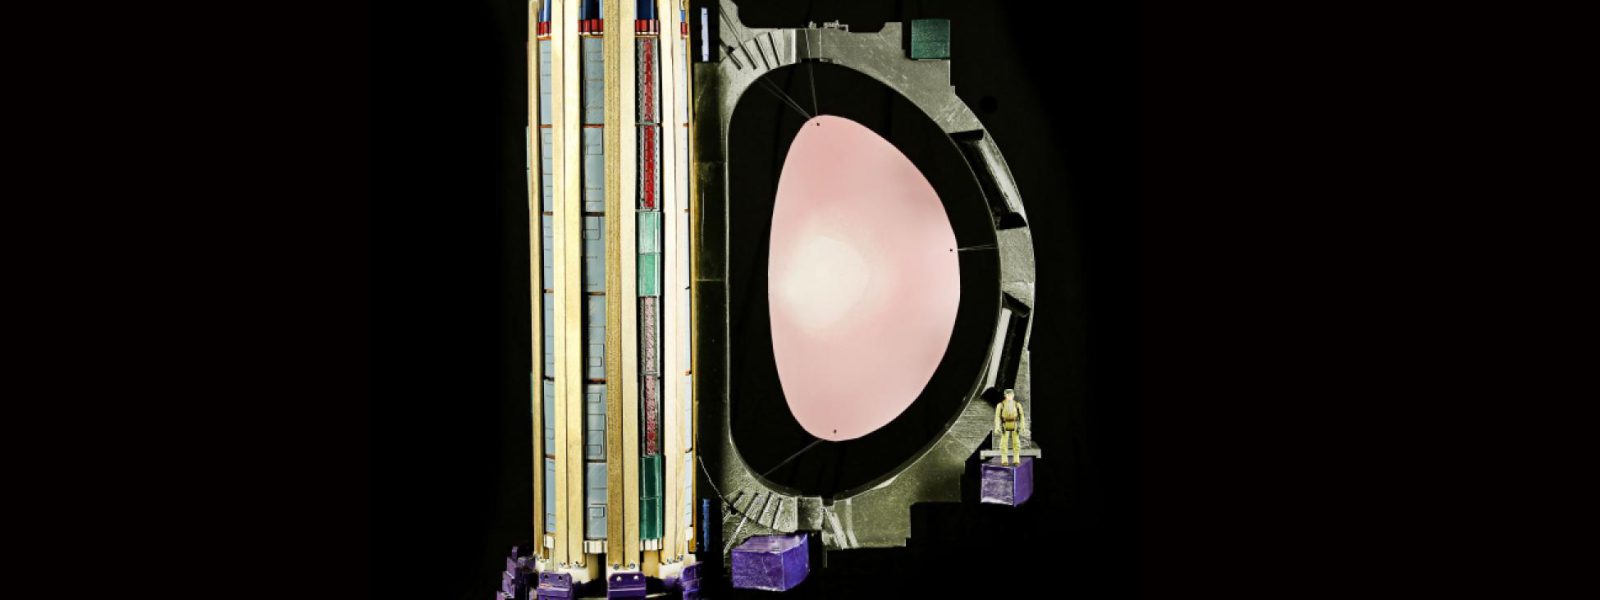 A “toy”-sized, but accurately scaled, version of the ITER central solenoid (left) with one of the 18 toroidal field coils, printed on a desktop 3D printer. The pink oval represents the plasma. Notice the action figure at right showing the model’s scale. Photo: US ITER/ORNL